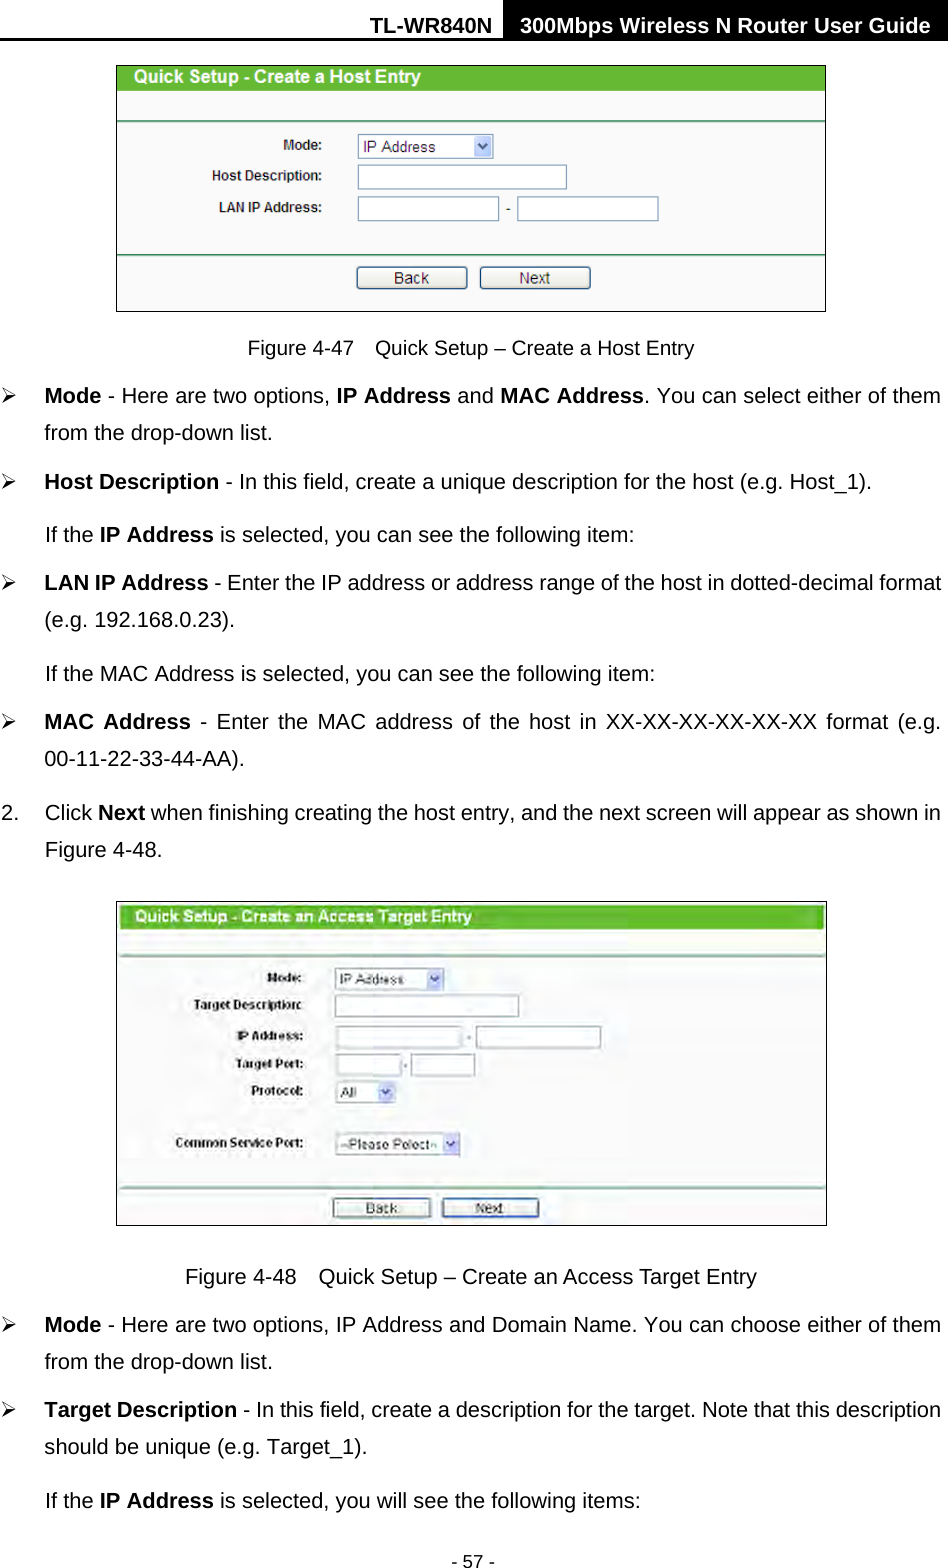 TL-WR840N 300Mbps Wireless N Router User Guide  - 57 -  Figure 4-47  Quick Setup – Create a Host Entry  Mode - Here are two options, IP Address and MAC Address. You can select either of them from the drop-down list.    Host Description - In this field, create a unique description for the host (e.g. Host_1).   If the IP Address is selected, you can see the following item:  LAN IP Address - Enter the IP address or address range of the host in dotted-decimal format (e.g. 192.168.0.23).   If the MAC Address is selected, you can see the following item:  MAC Address  -  Enter the MAC address of the host in XX-XX-XX-XX-XX-XX format (e.g. 00-11-22-33-44-AA).   2.  Click Next when finishing creating the host entry, and the next screen will appear as shown in Figure 4-48.  Figure 4-48  Quick Setup – Create an Access Target Entry  Mode - Here are two options, IP Address and Domain Name. You can choose either of them from the drop-down list.    Target Description - In this field, create a description for the target. Note that this description should be unique (e.g. Target_1).   If the IP Address is selected, you will see the following items: 